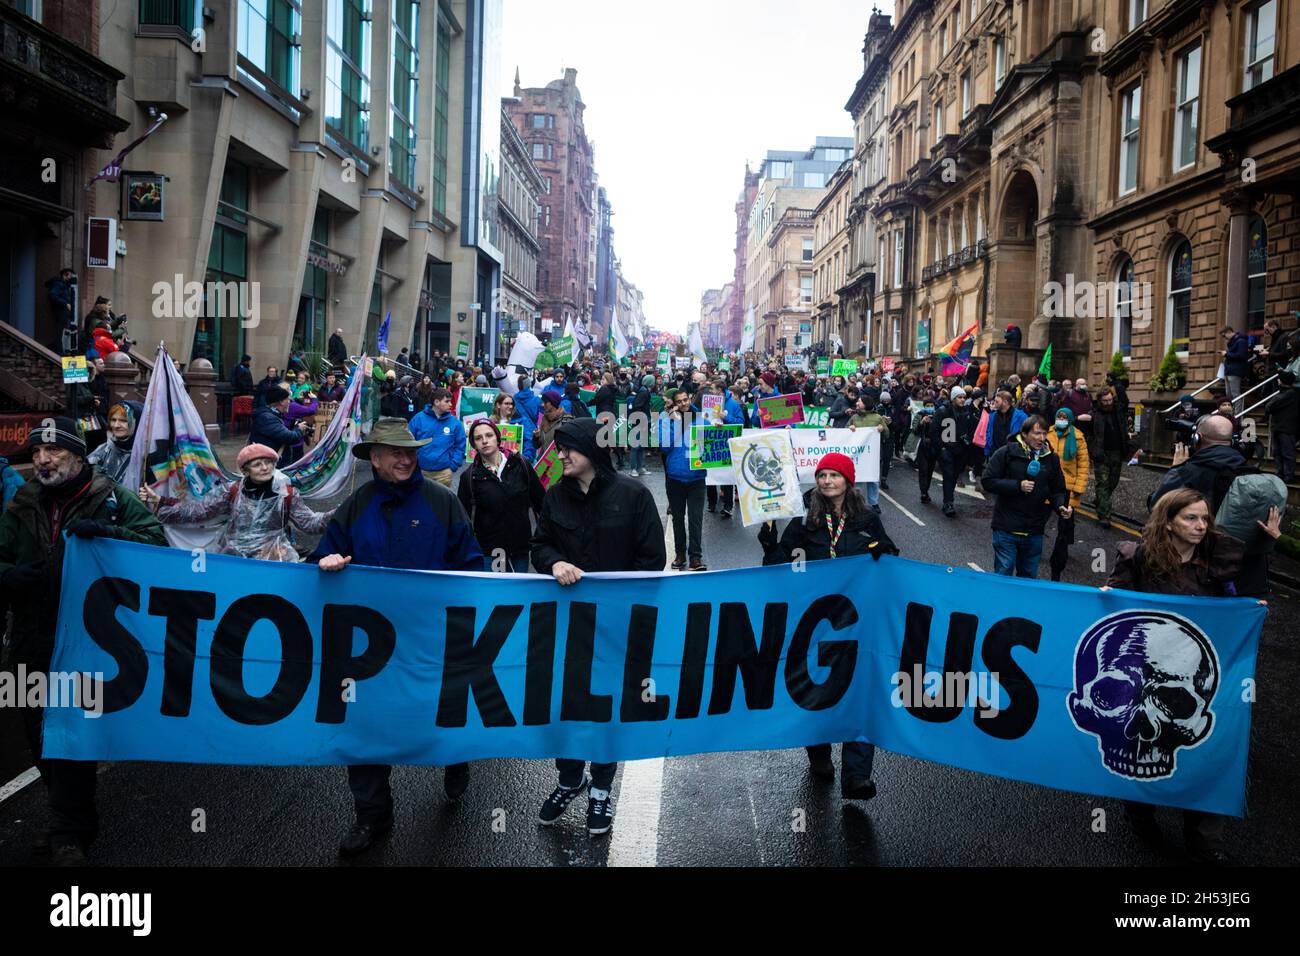 Glasgow, UK. 06th Nov, 2021. Protesters with a placards march through the city during the Global Day of Action.ÊThe protest sees movements mobilising against the world leaders attending the COP26 Climate summit. Credit: Andy Barton/Alamy Live News Stock Photo